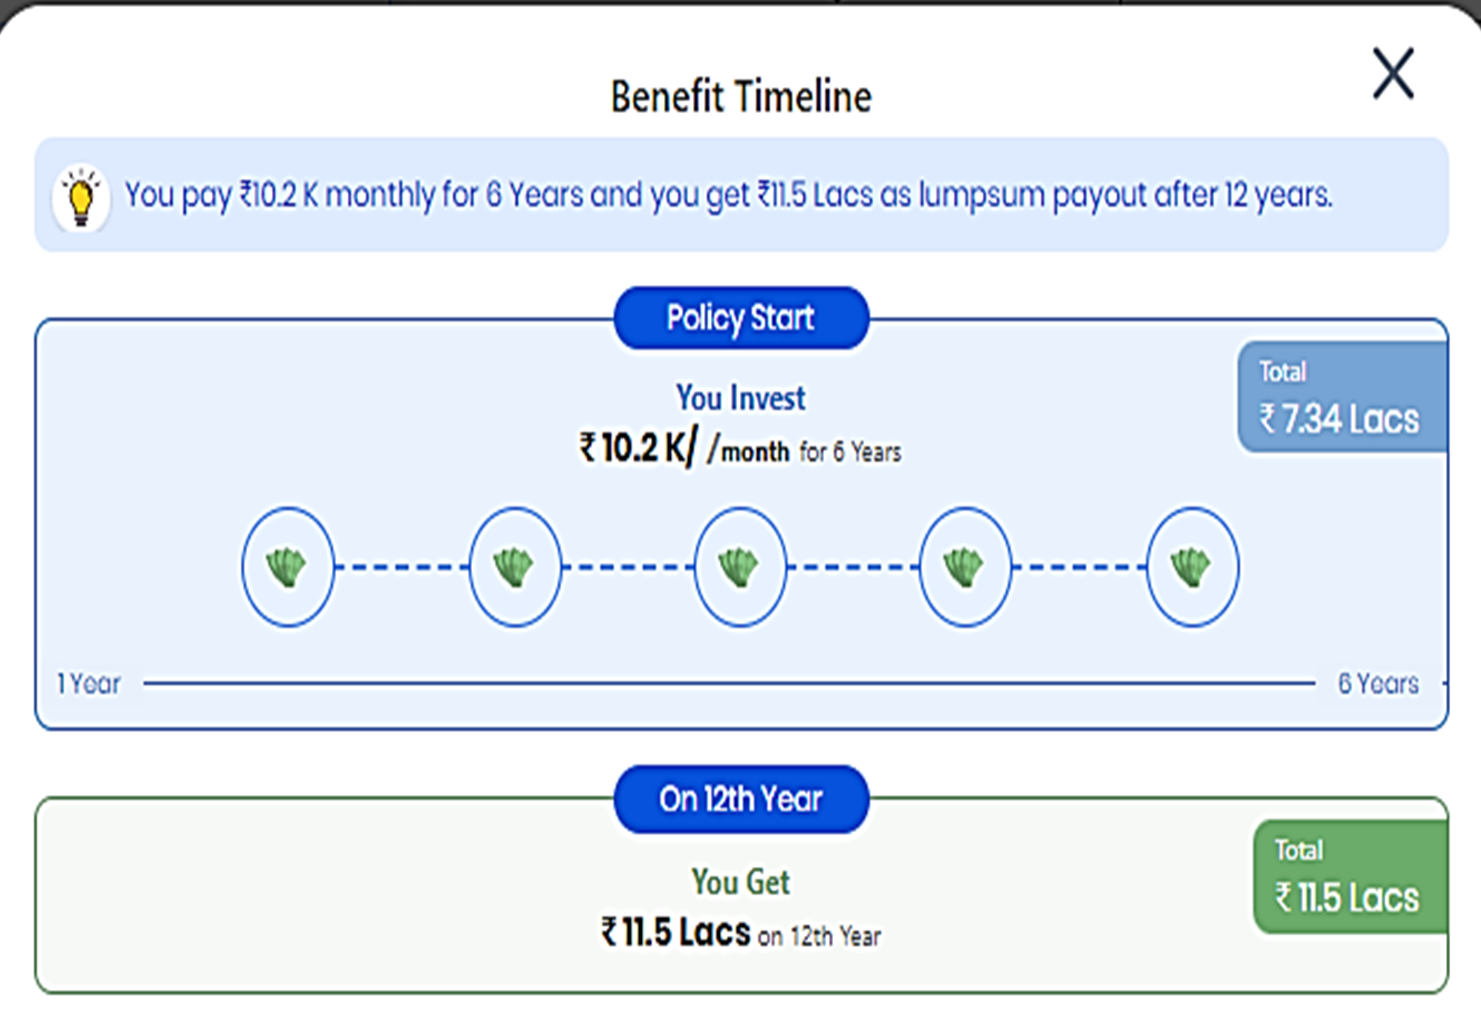 This image shows how a life insurance with guaranteed return plan will look like